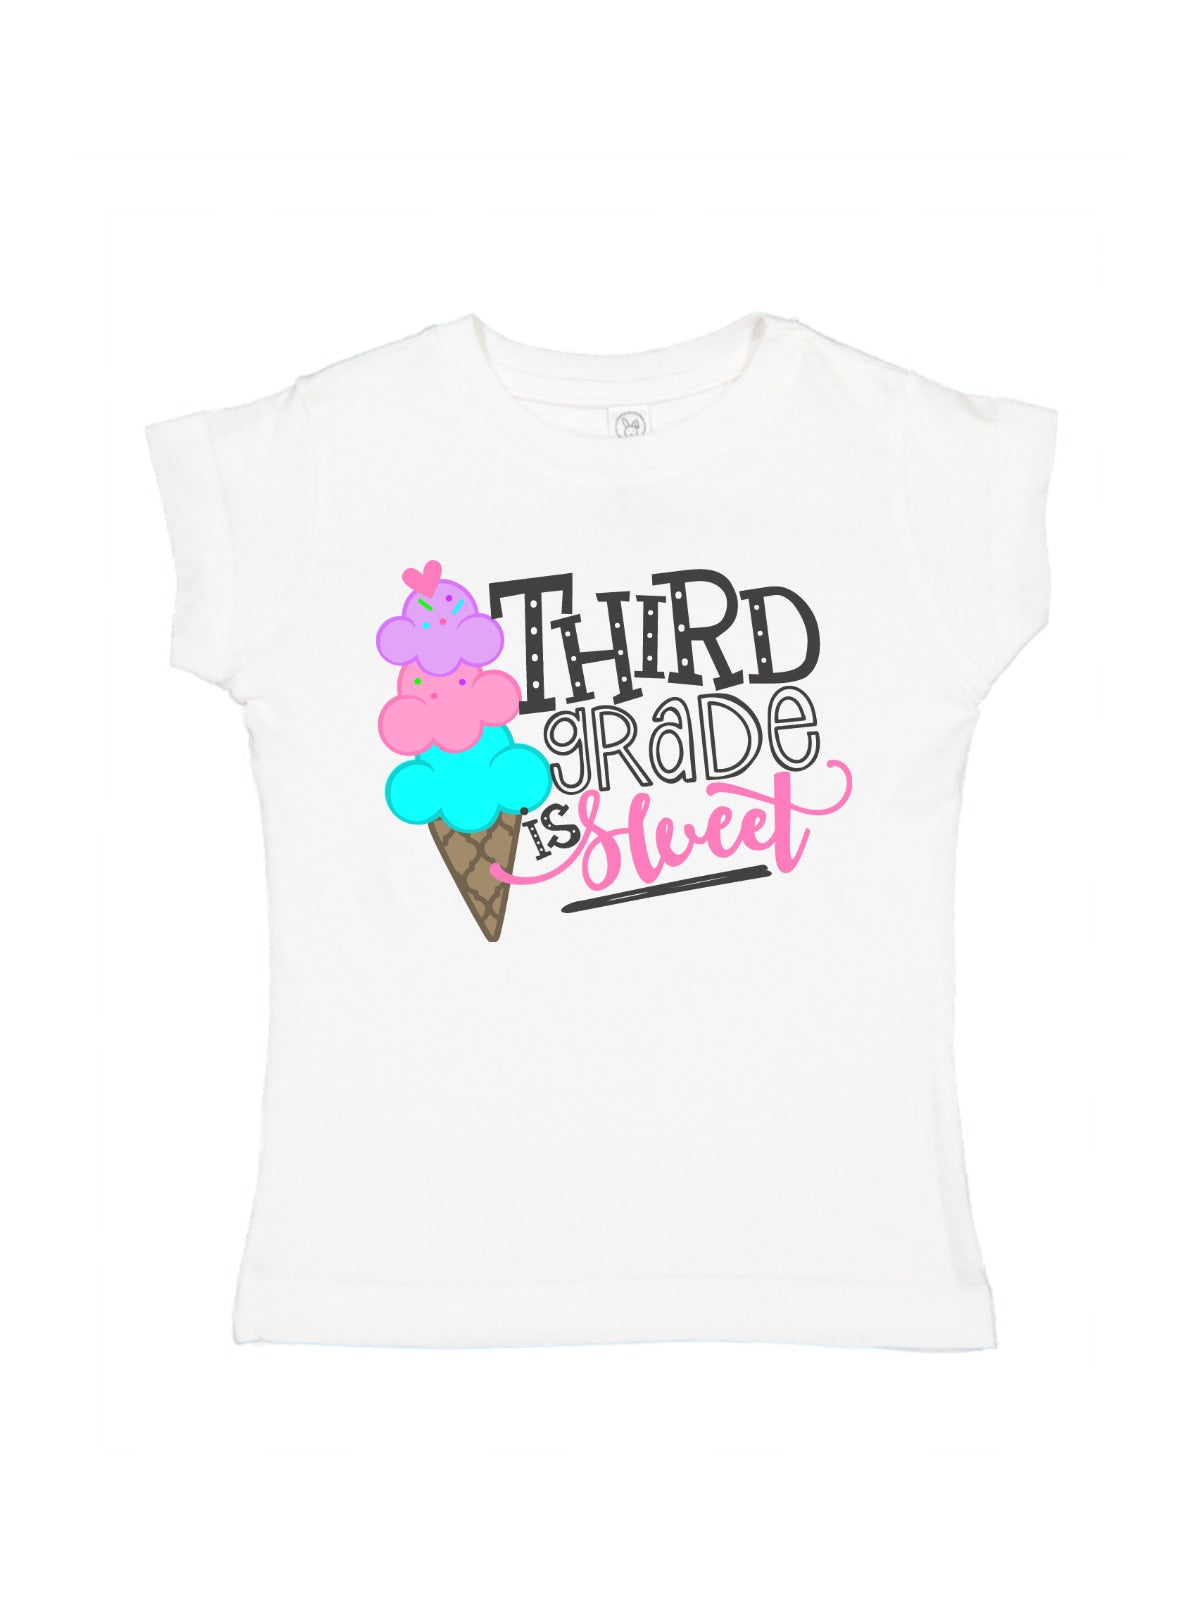 Third Grade is Sweet Girls First Day of School Shirts in Black, White, Blue, and Pink